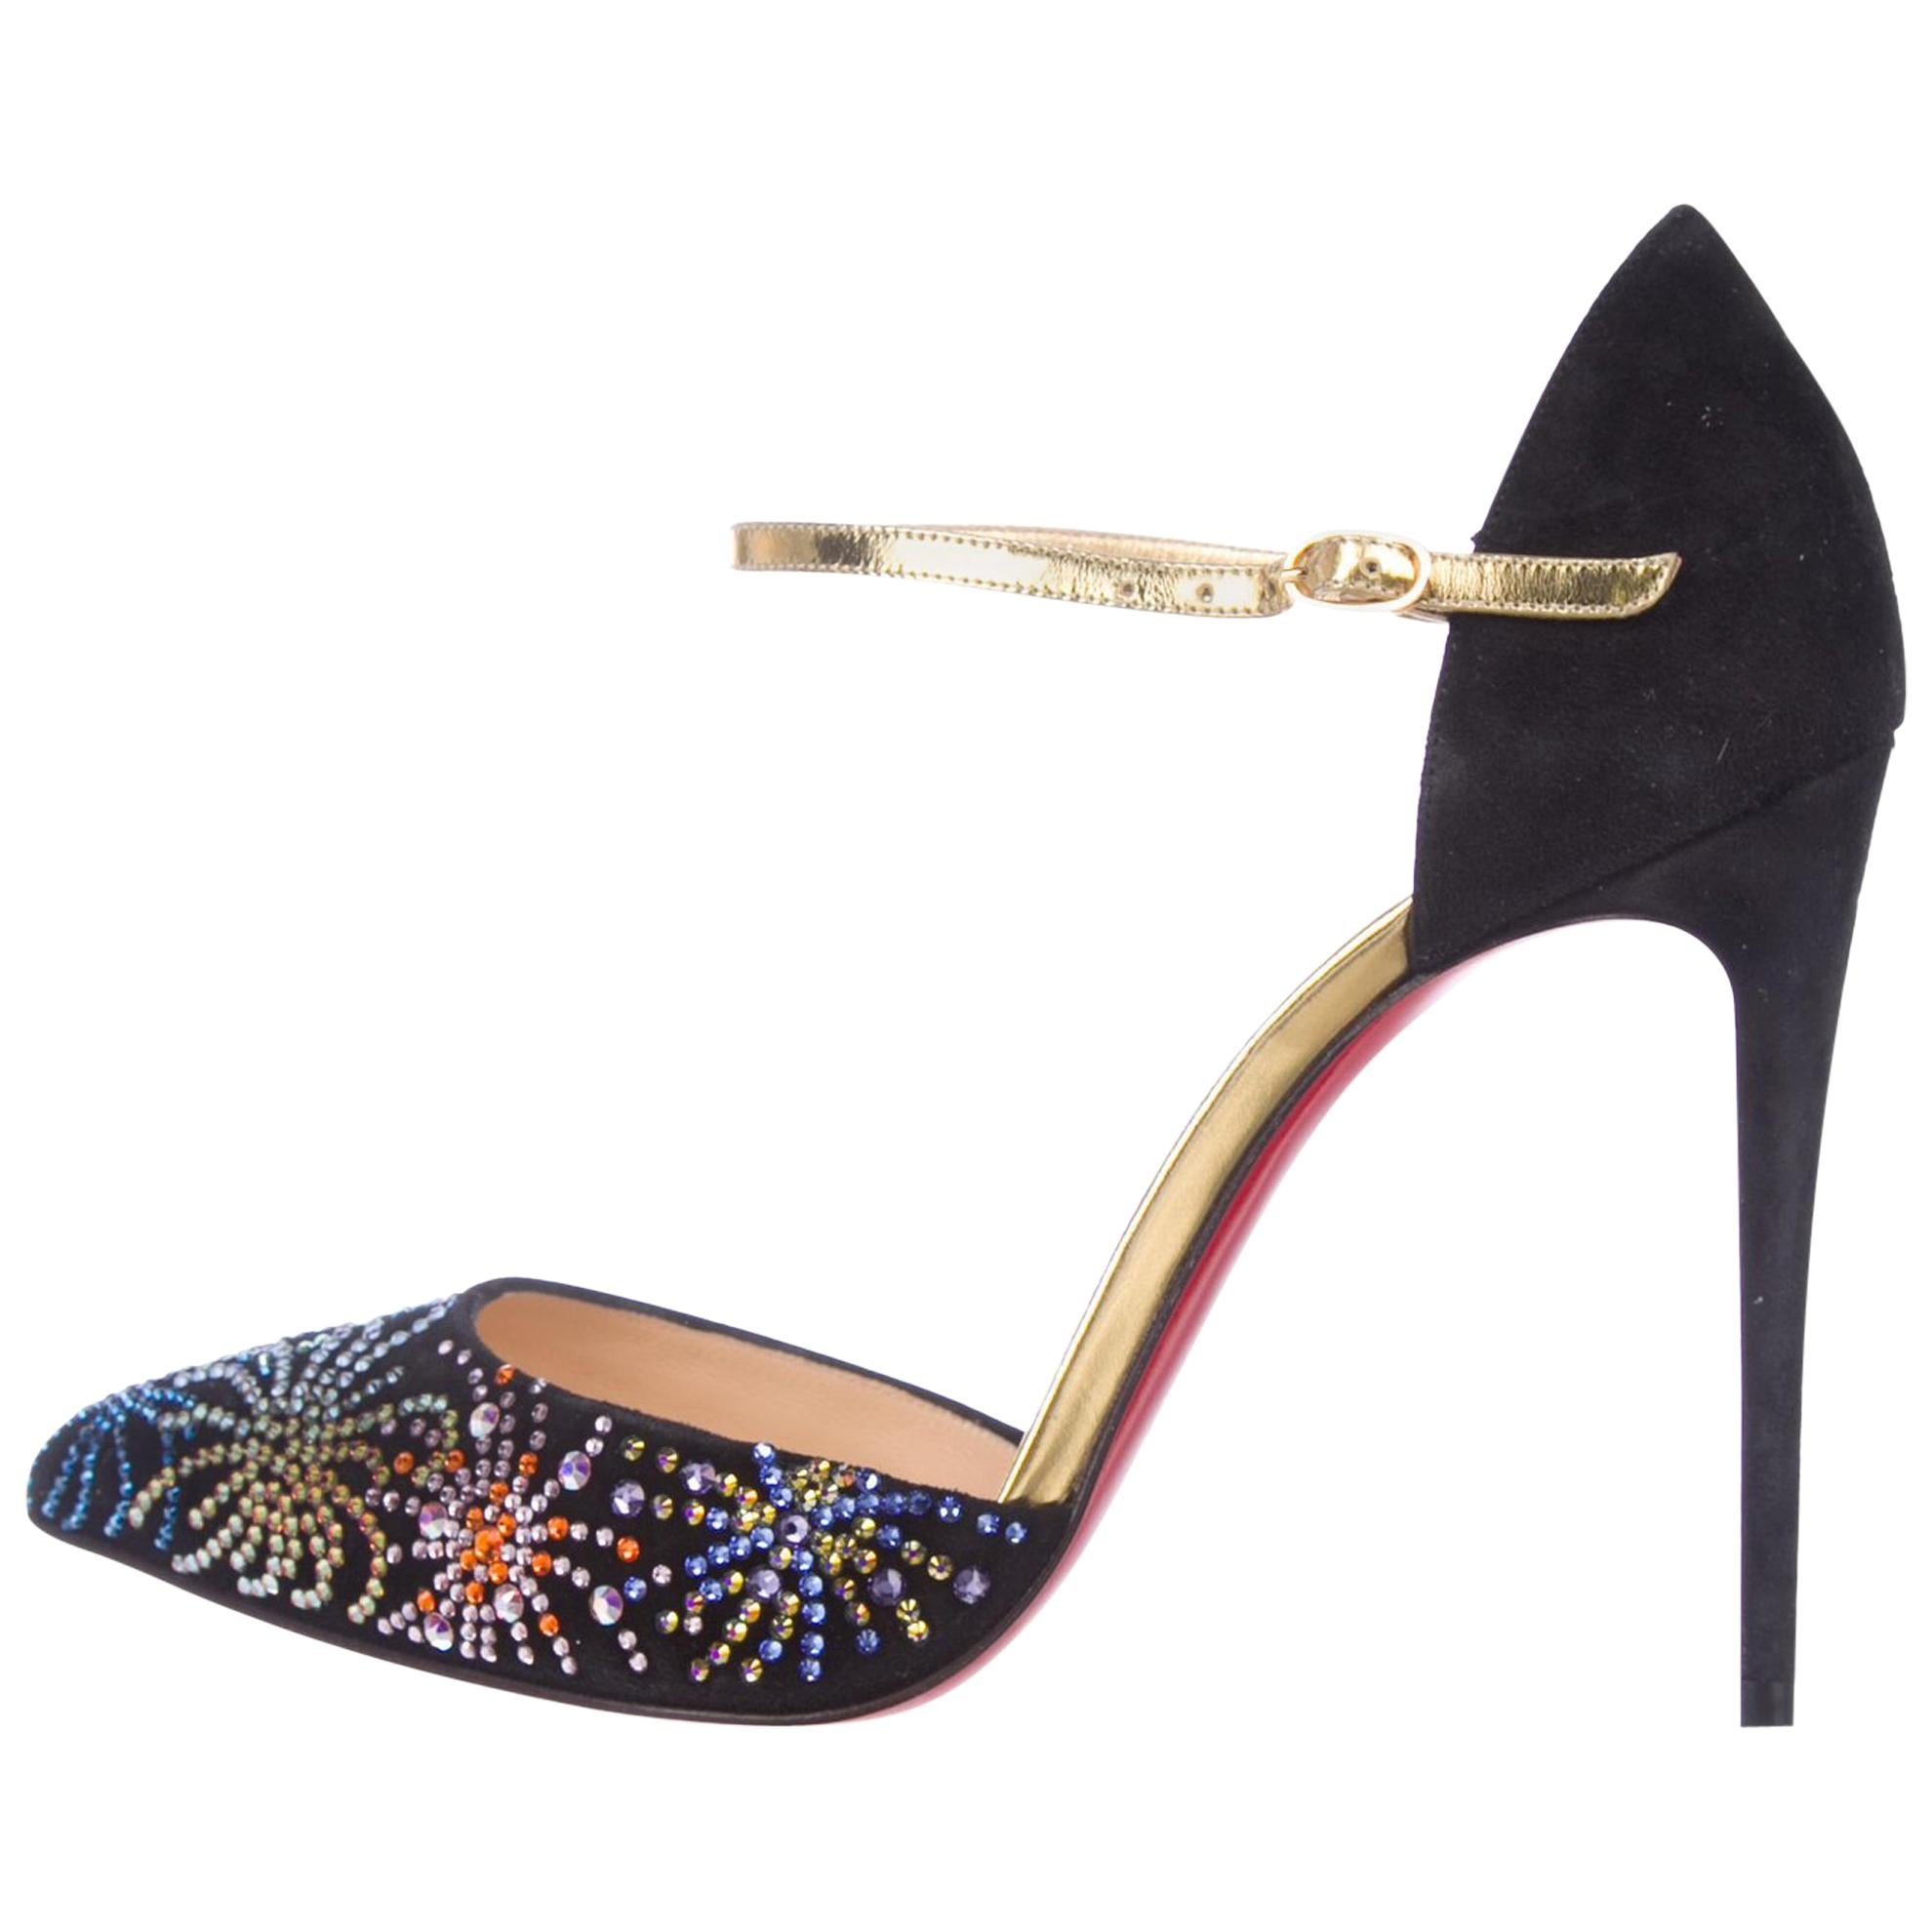 Christian Louboutin NEW Black Suede Multi Holiday Evening Crystal Pumps Heels 